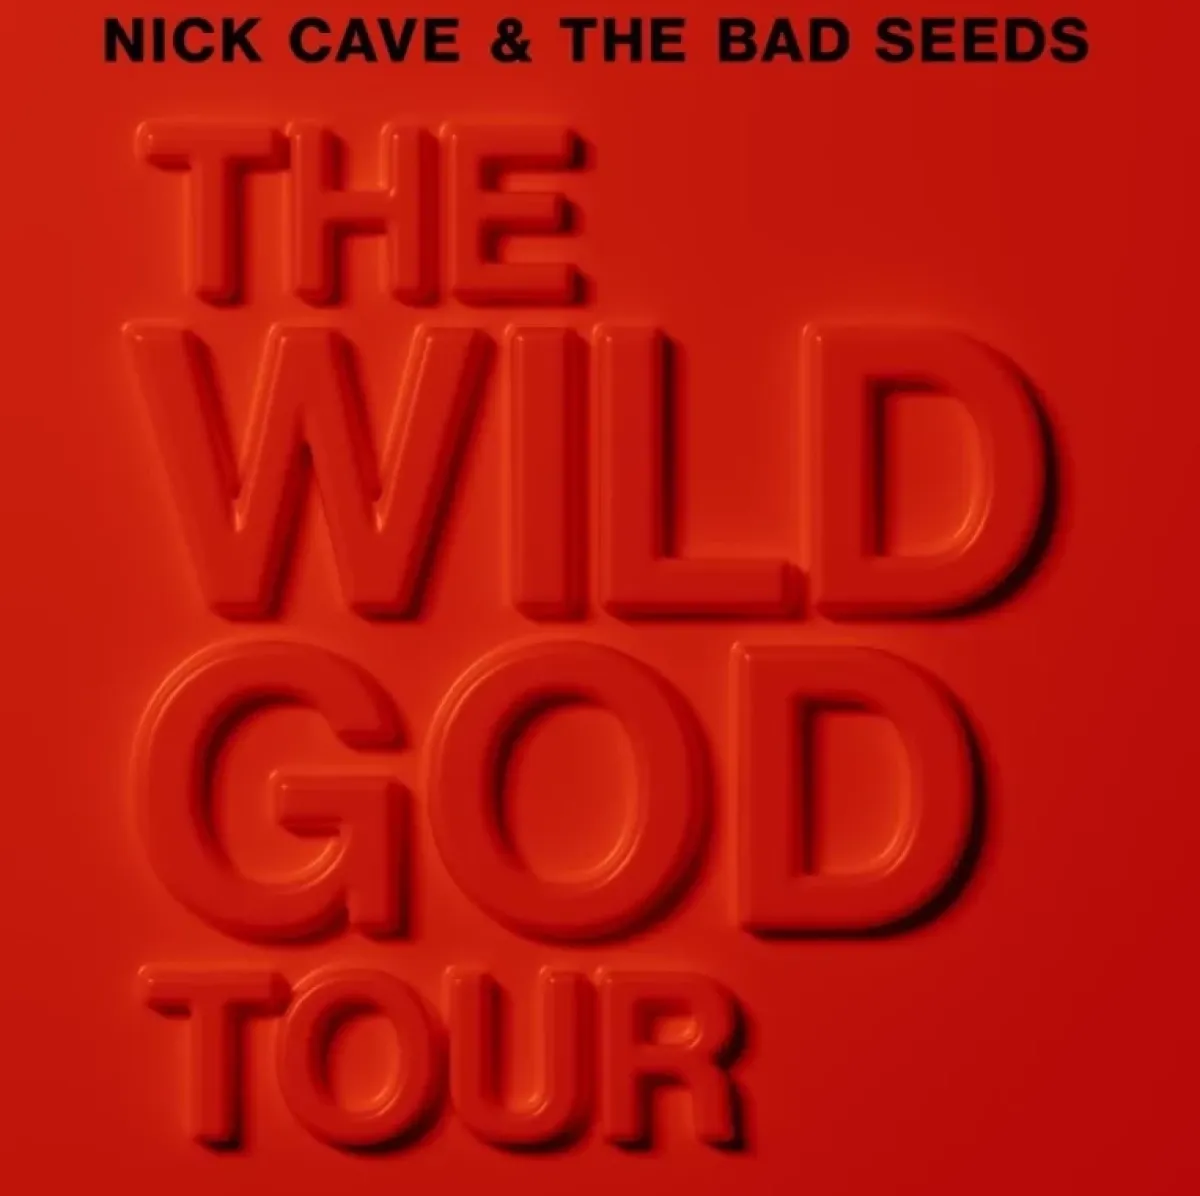 Nick Cave And The Bad Seeds at Manchester AO Arena Tickets